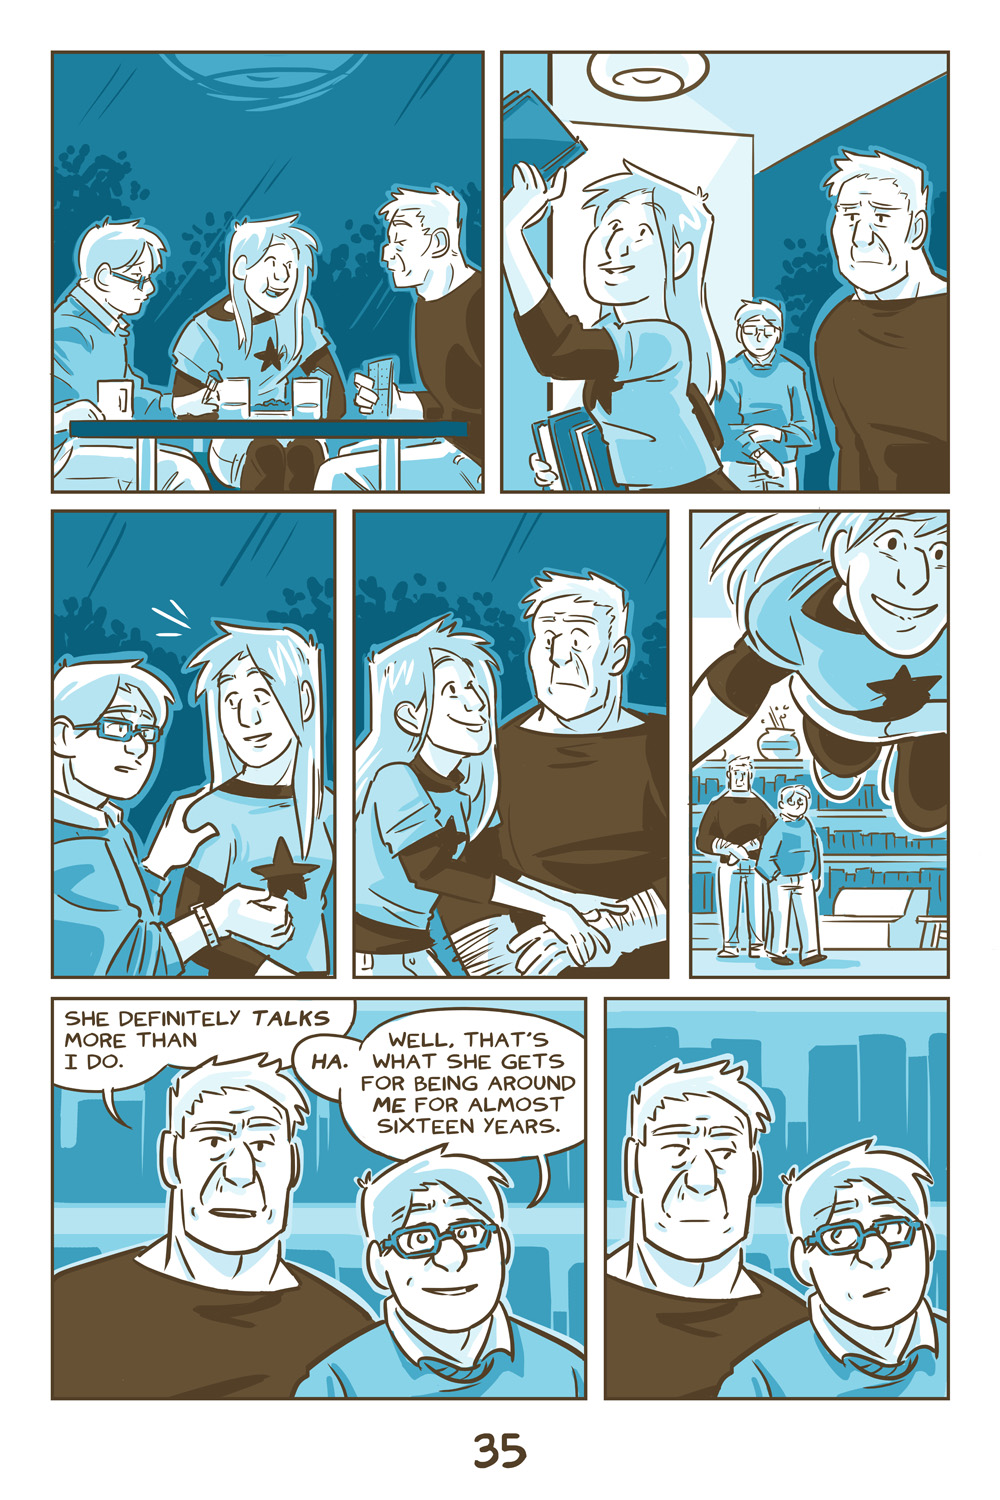 Chapter 1, Page 35